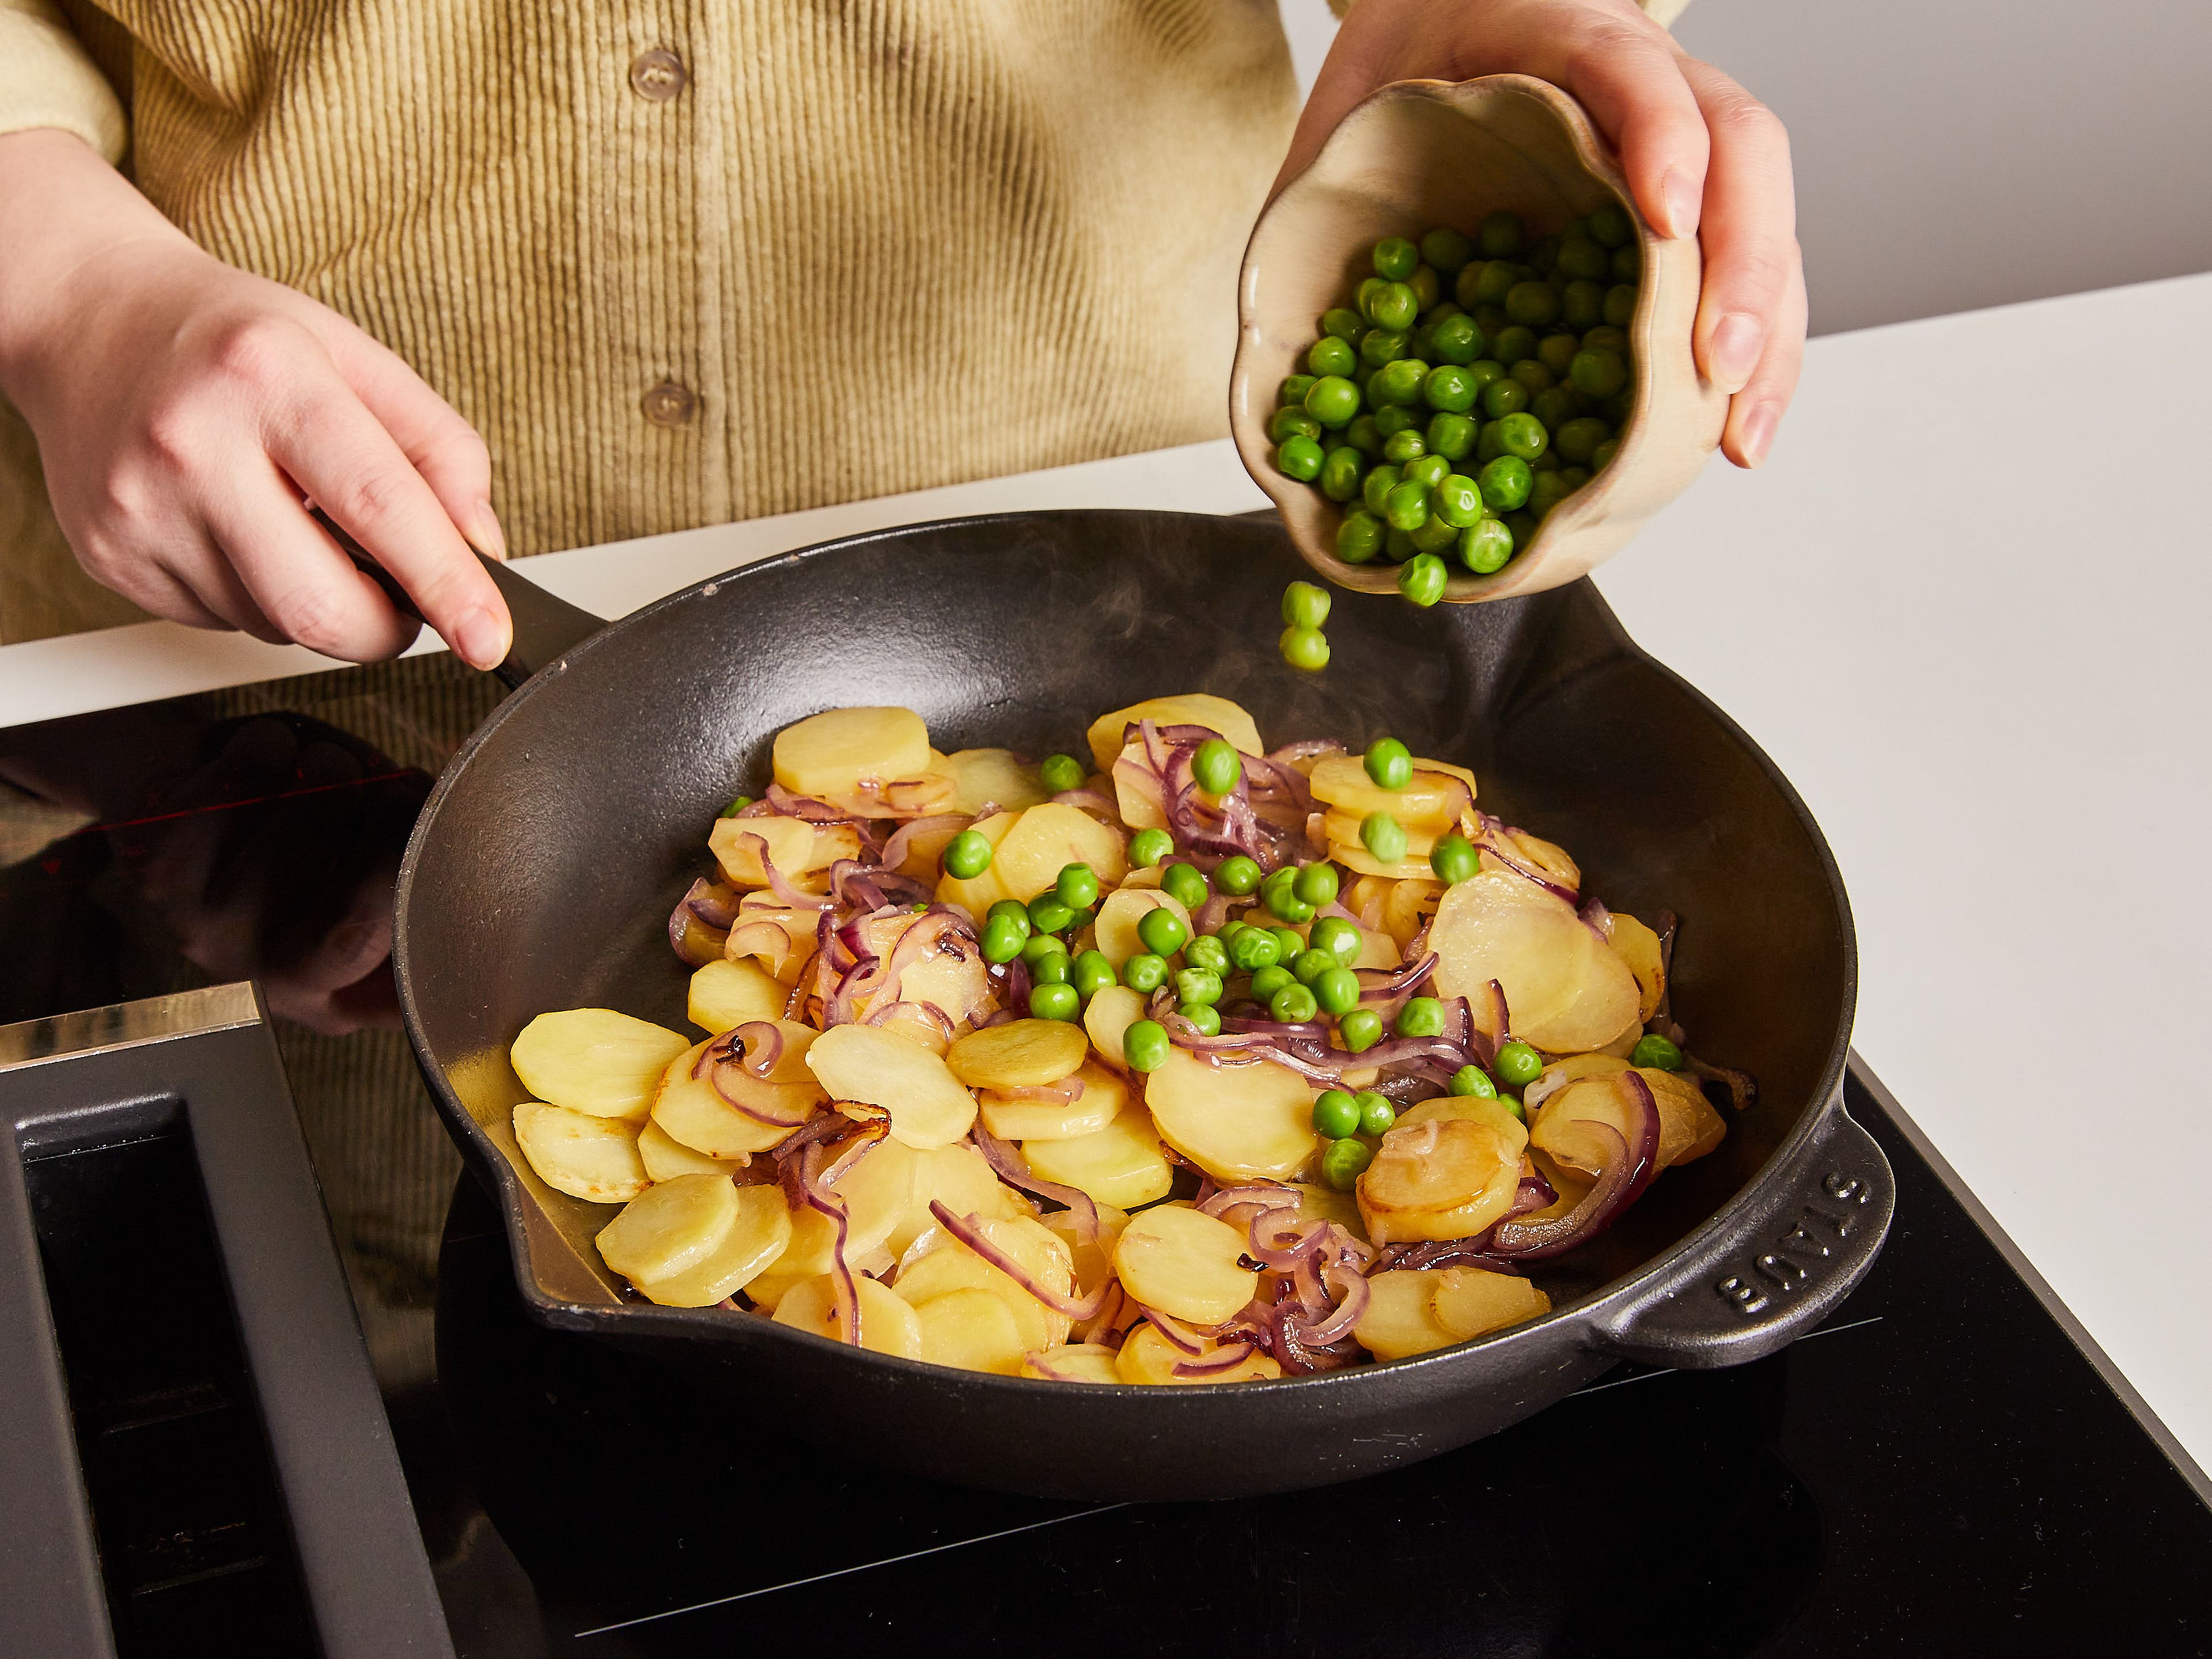 Add olive oil to a nonstick ovenproof pan, set over medium heat. Add red onion and potatoes and cook approx. 10 min., stirring often, until potatoes are fork tender. Then add peas and most of the tomatoes and continue cooking for approx. 3 min. more, or until tomatoes are softened.